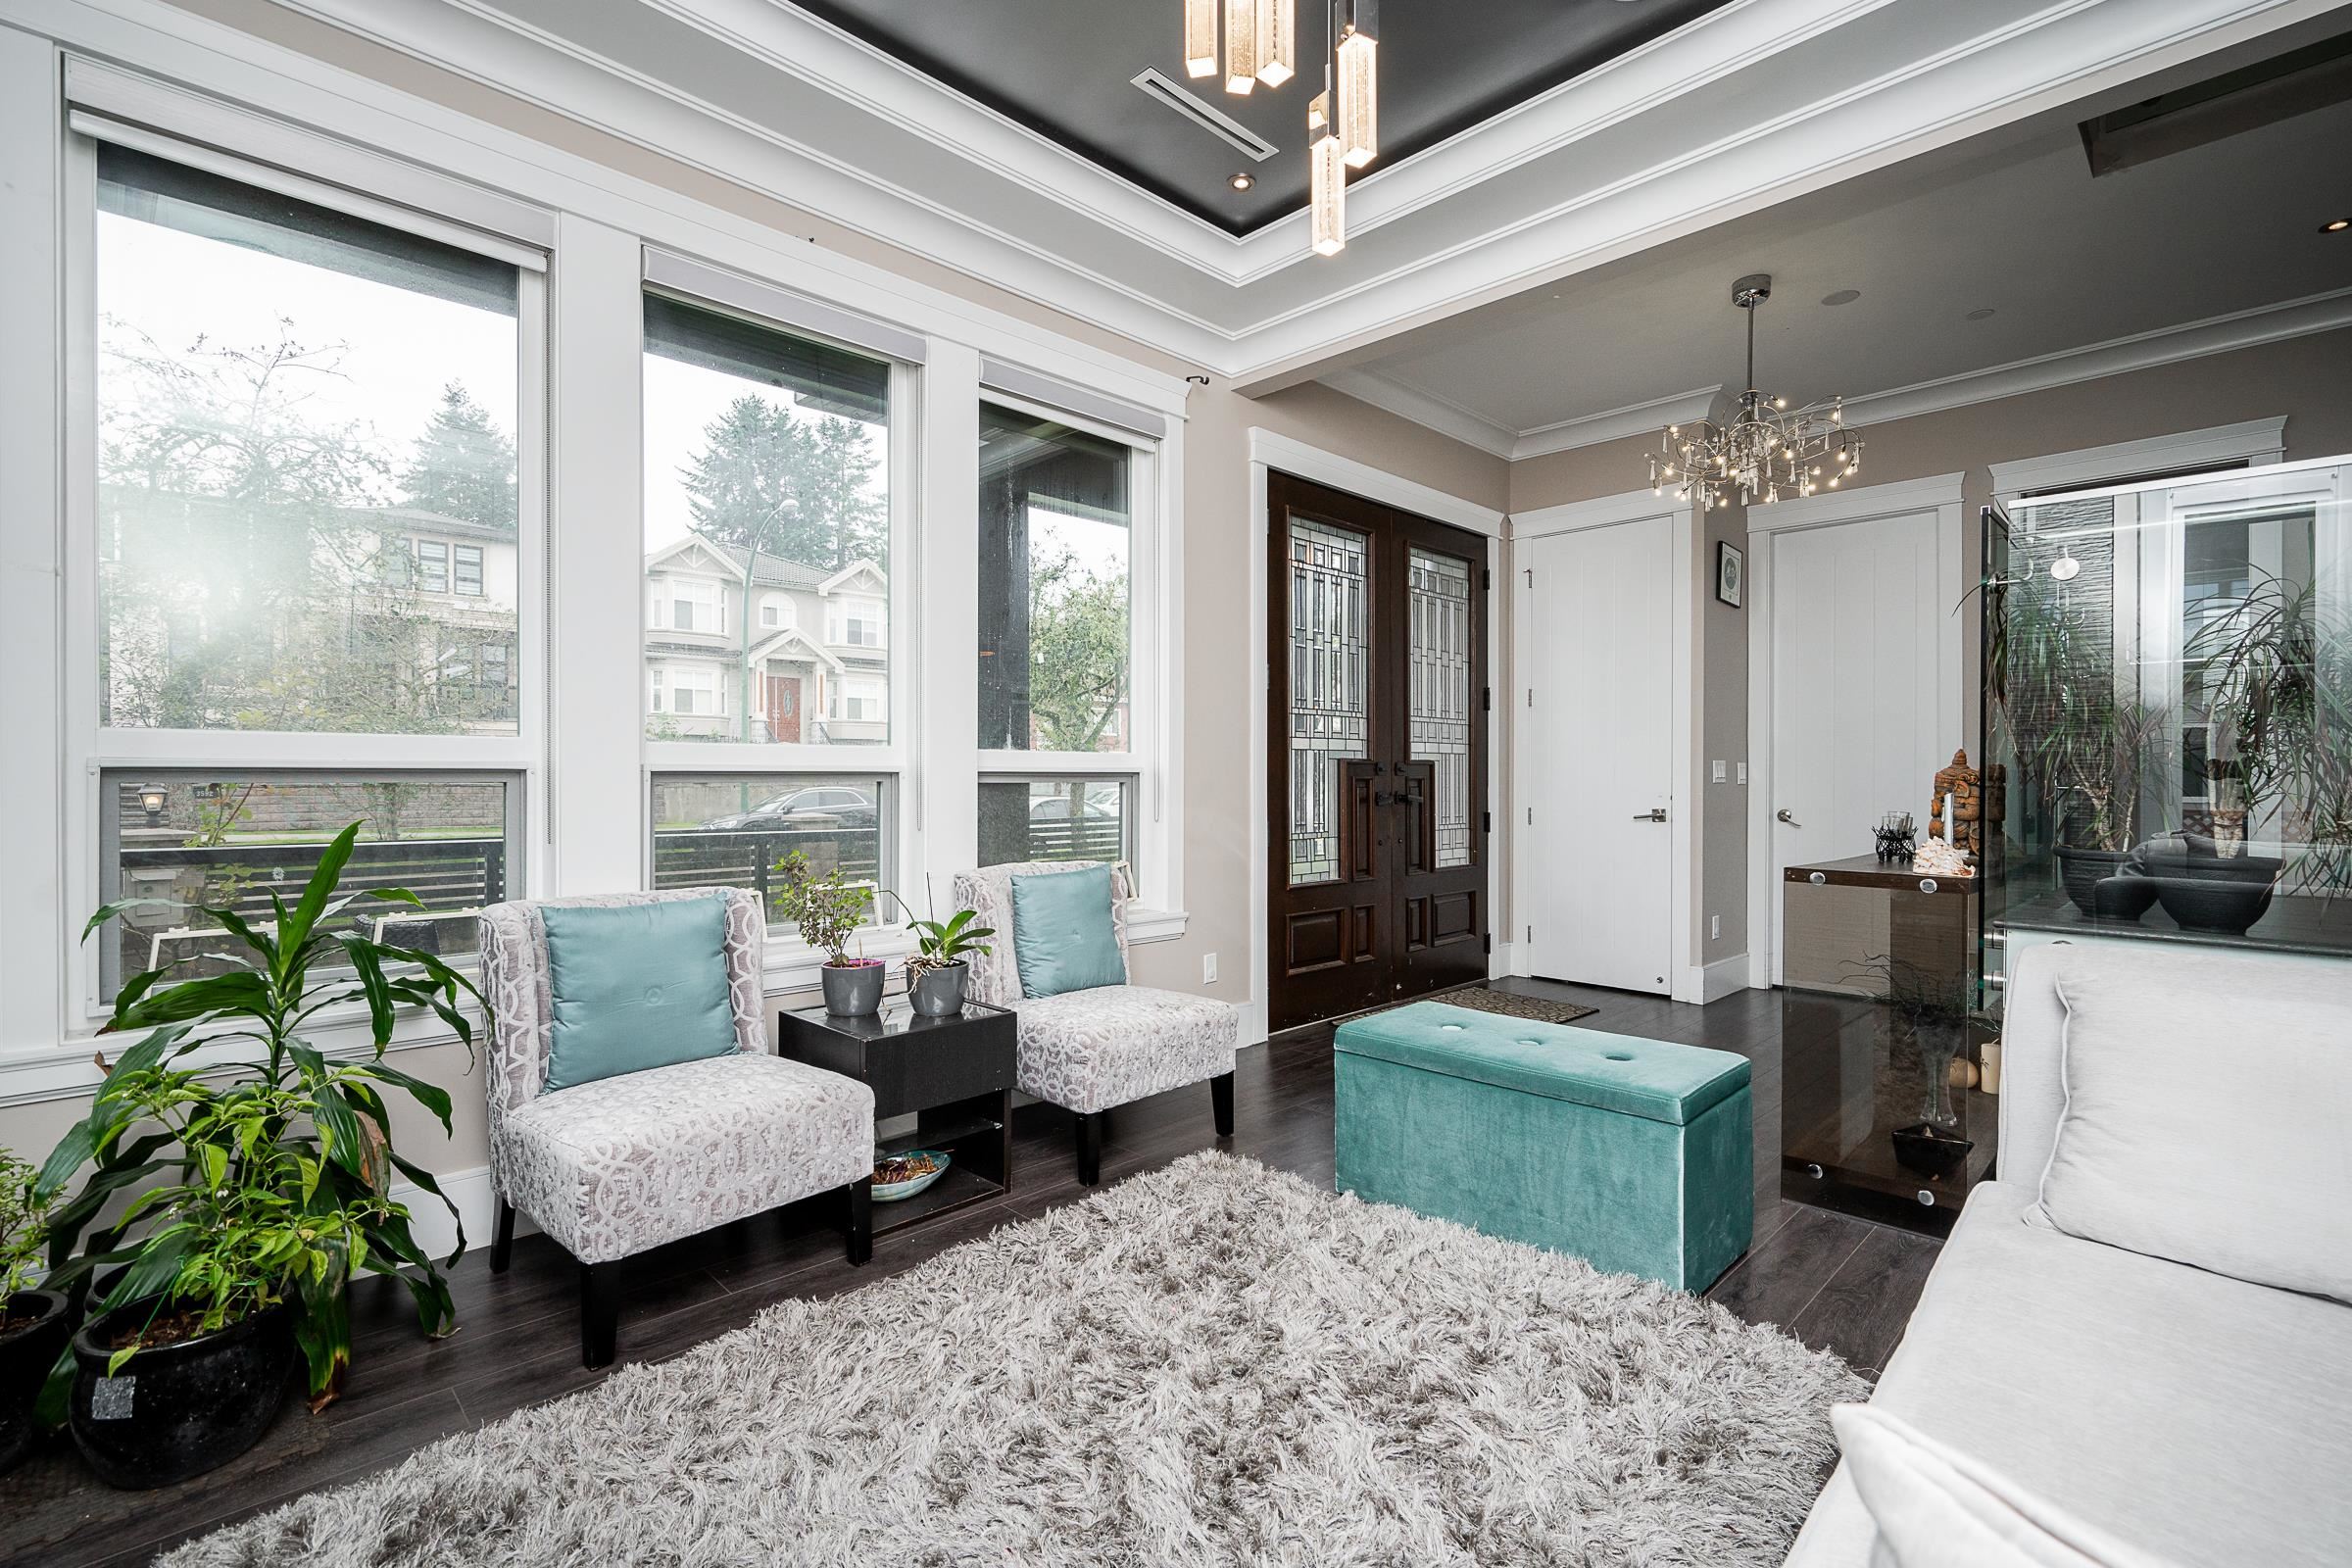 Listing image of 3595 VIMY CRESCENT